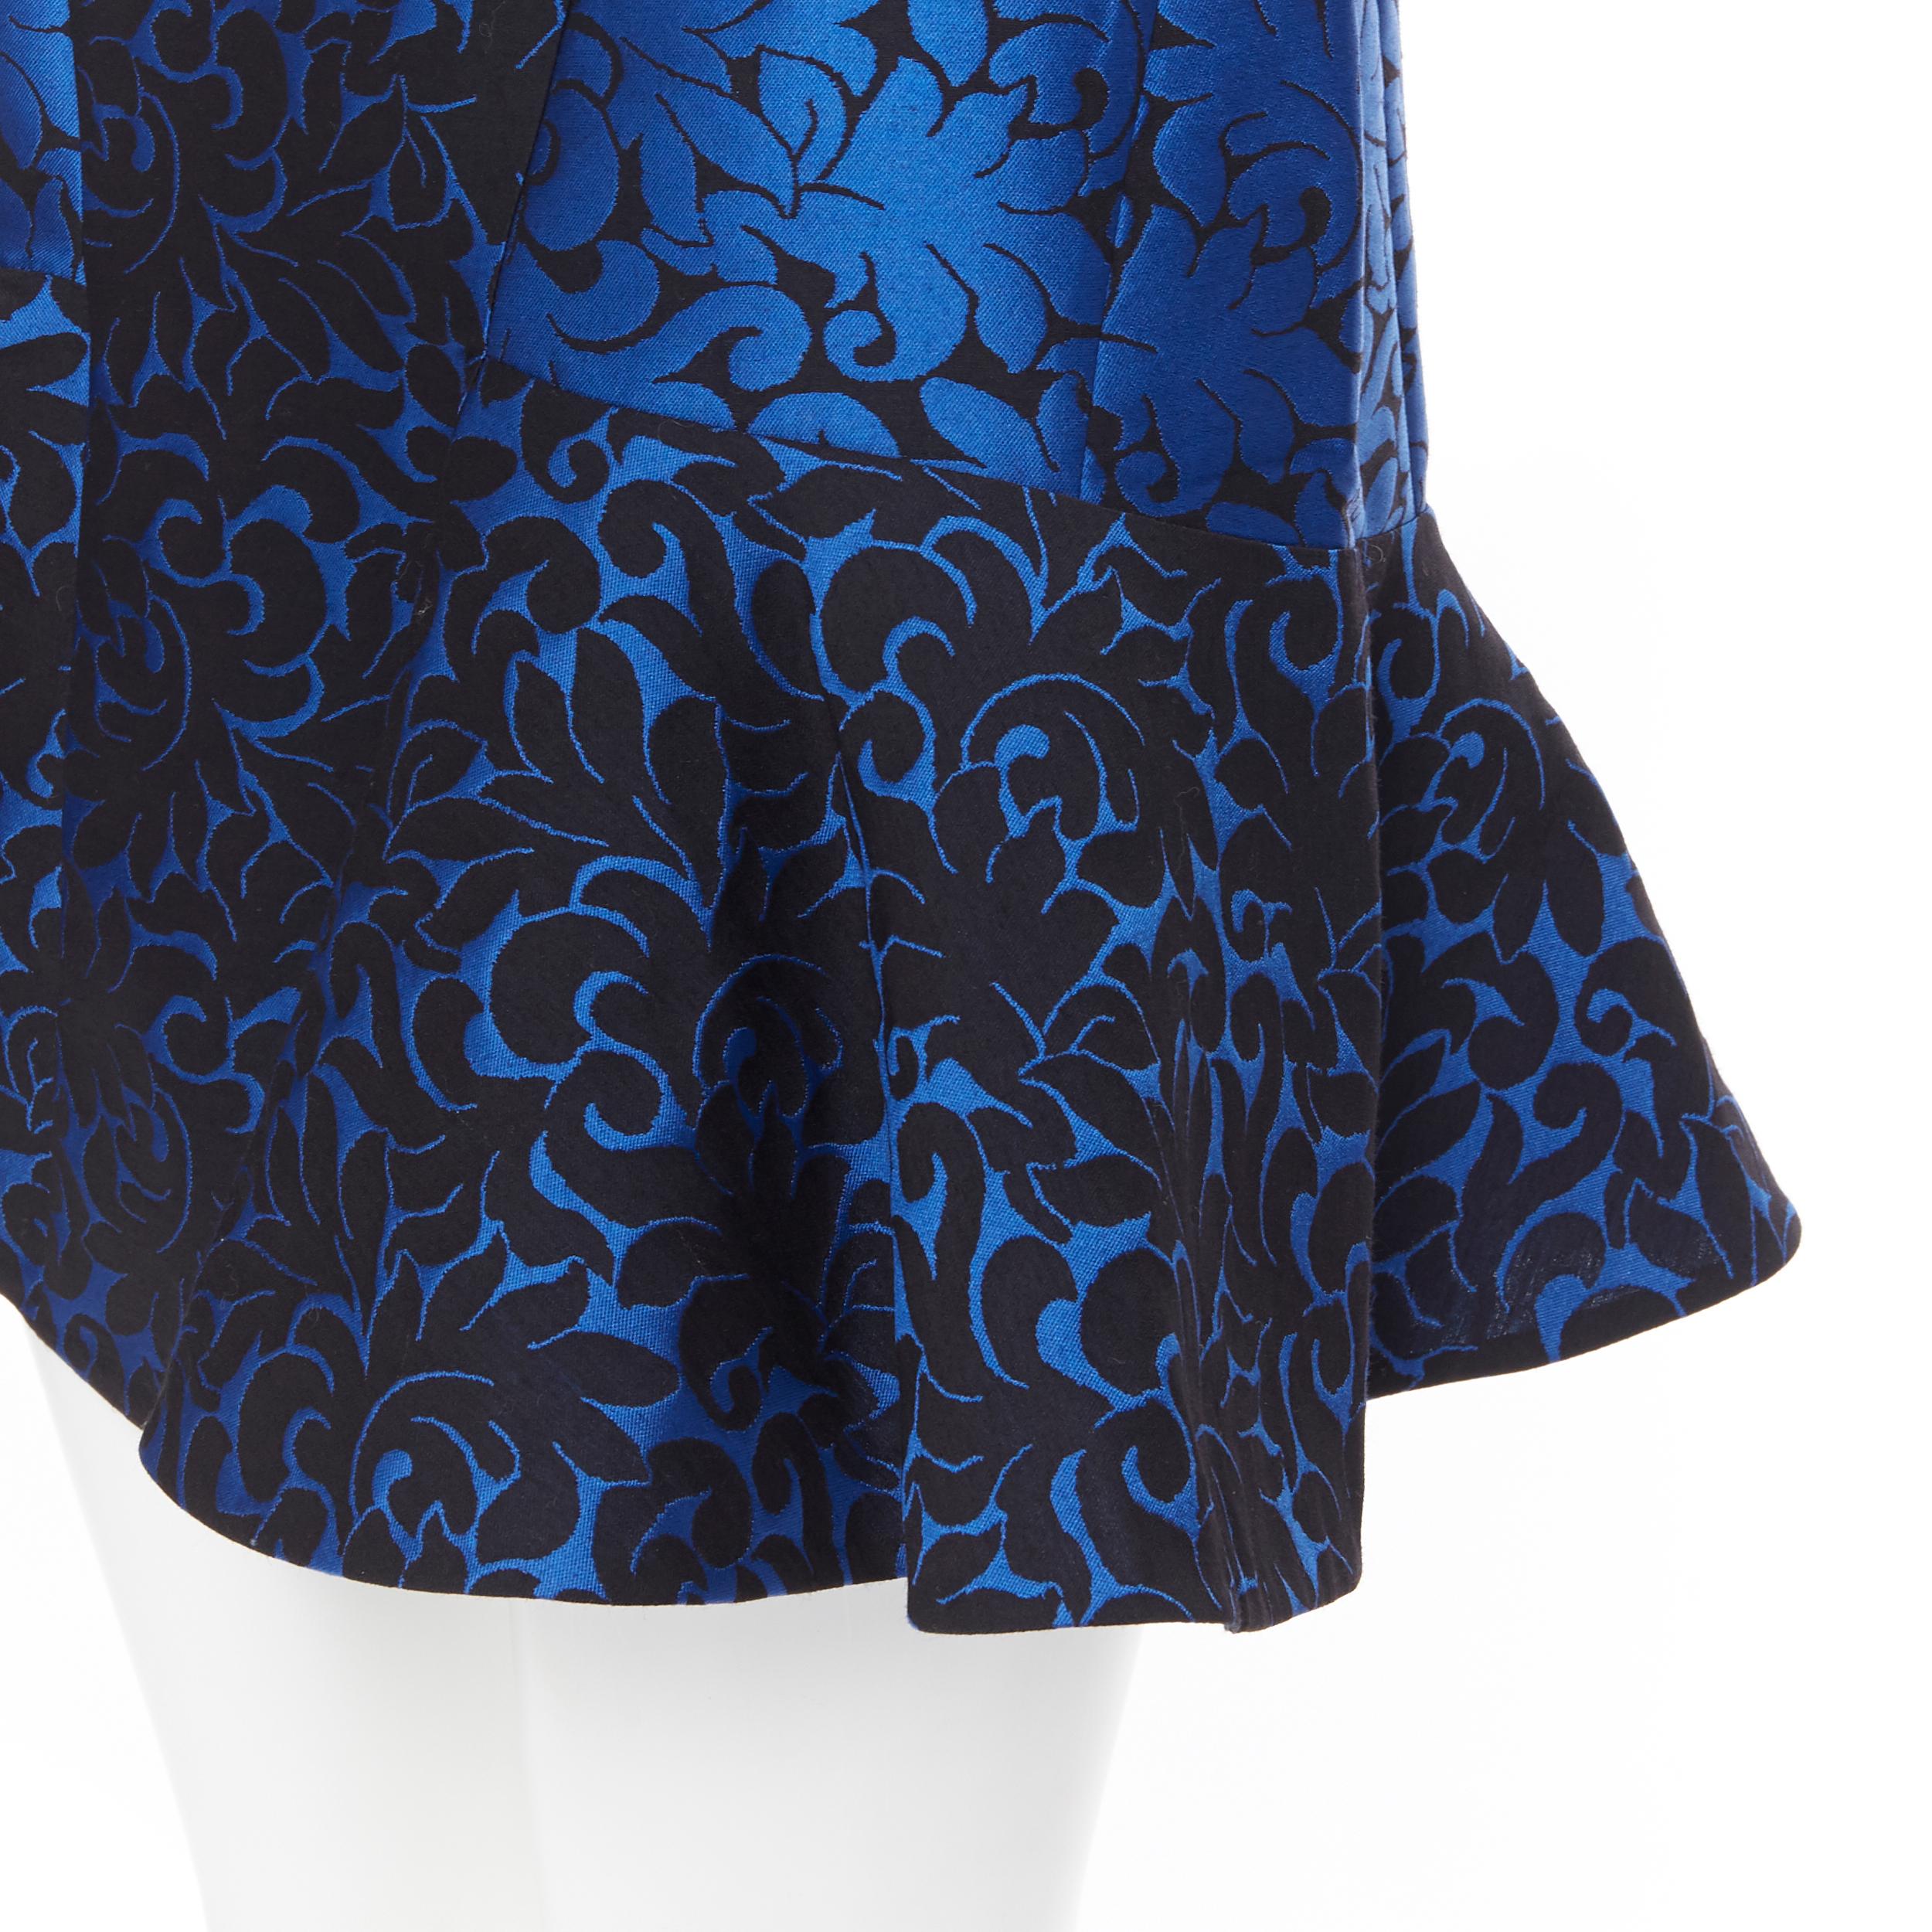 new STELLA MCCARTNEY 2012 blue black floral jacquard fit flared skirt IT36 XS
Brand: Stella McCartney
Designer: Stella McCartney
Collection: 2012
Model Name / Style: Flared skirt
Material: Wool, polyester
Color: Blue, black
Pattern: Floral
Closure: